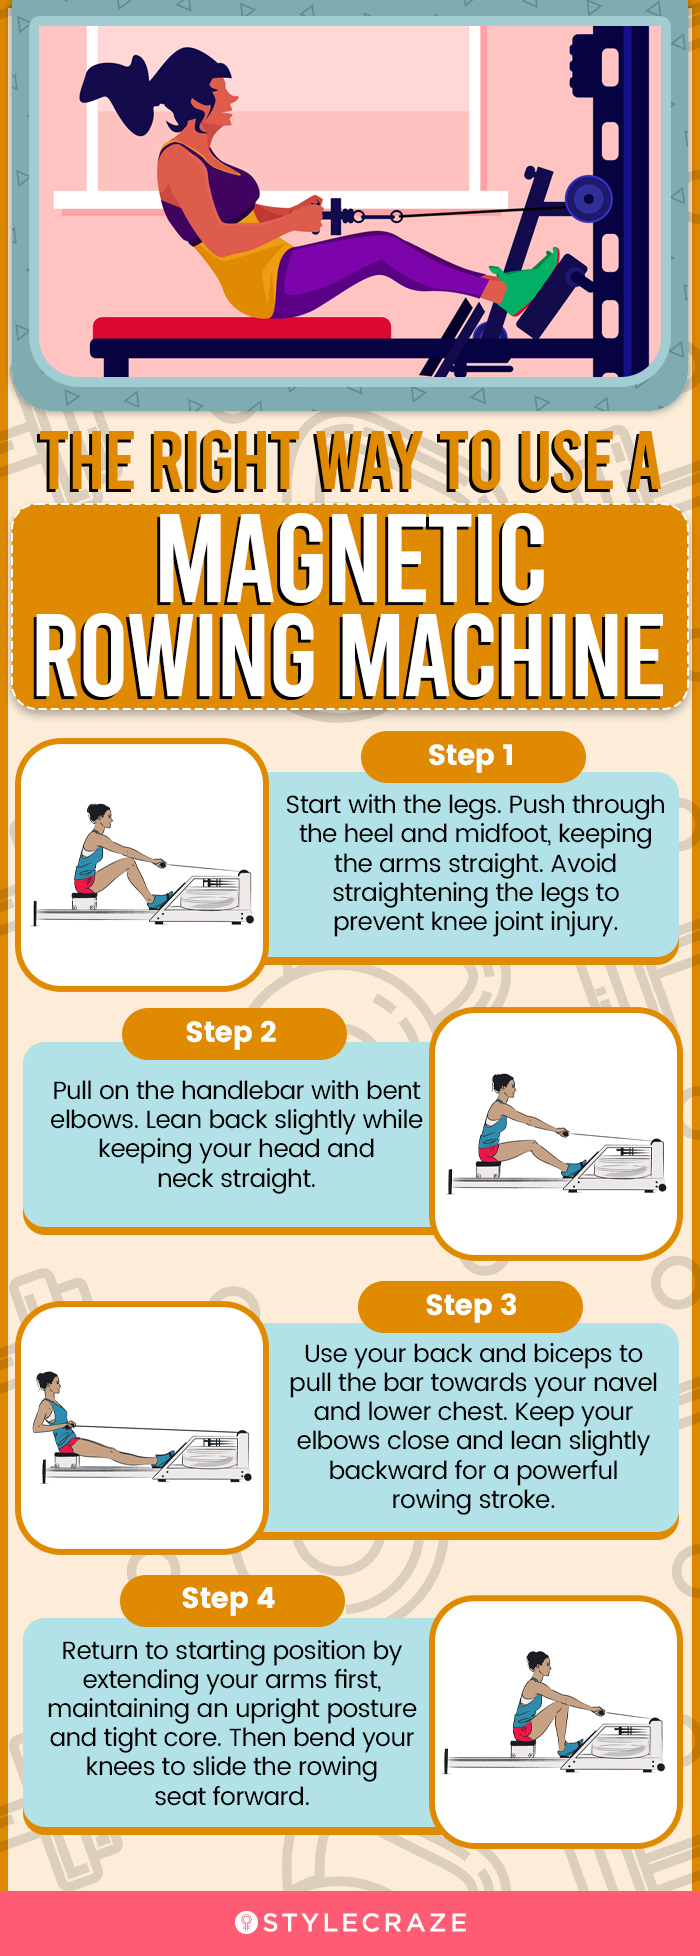 The Right Way To Use A Magnetic Rowing Machine (infographic)